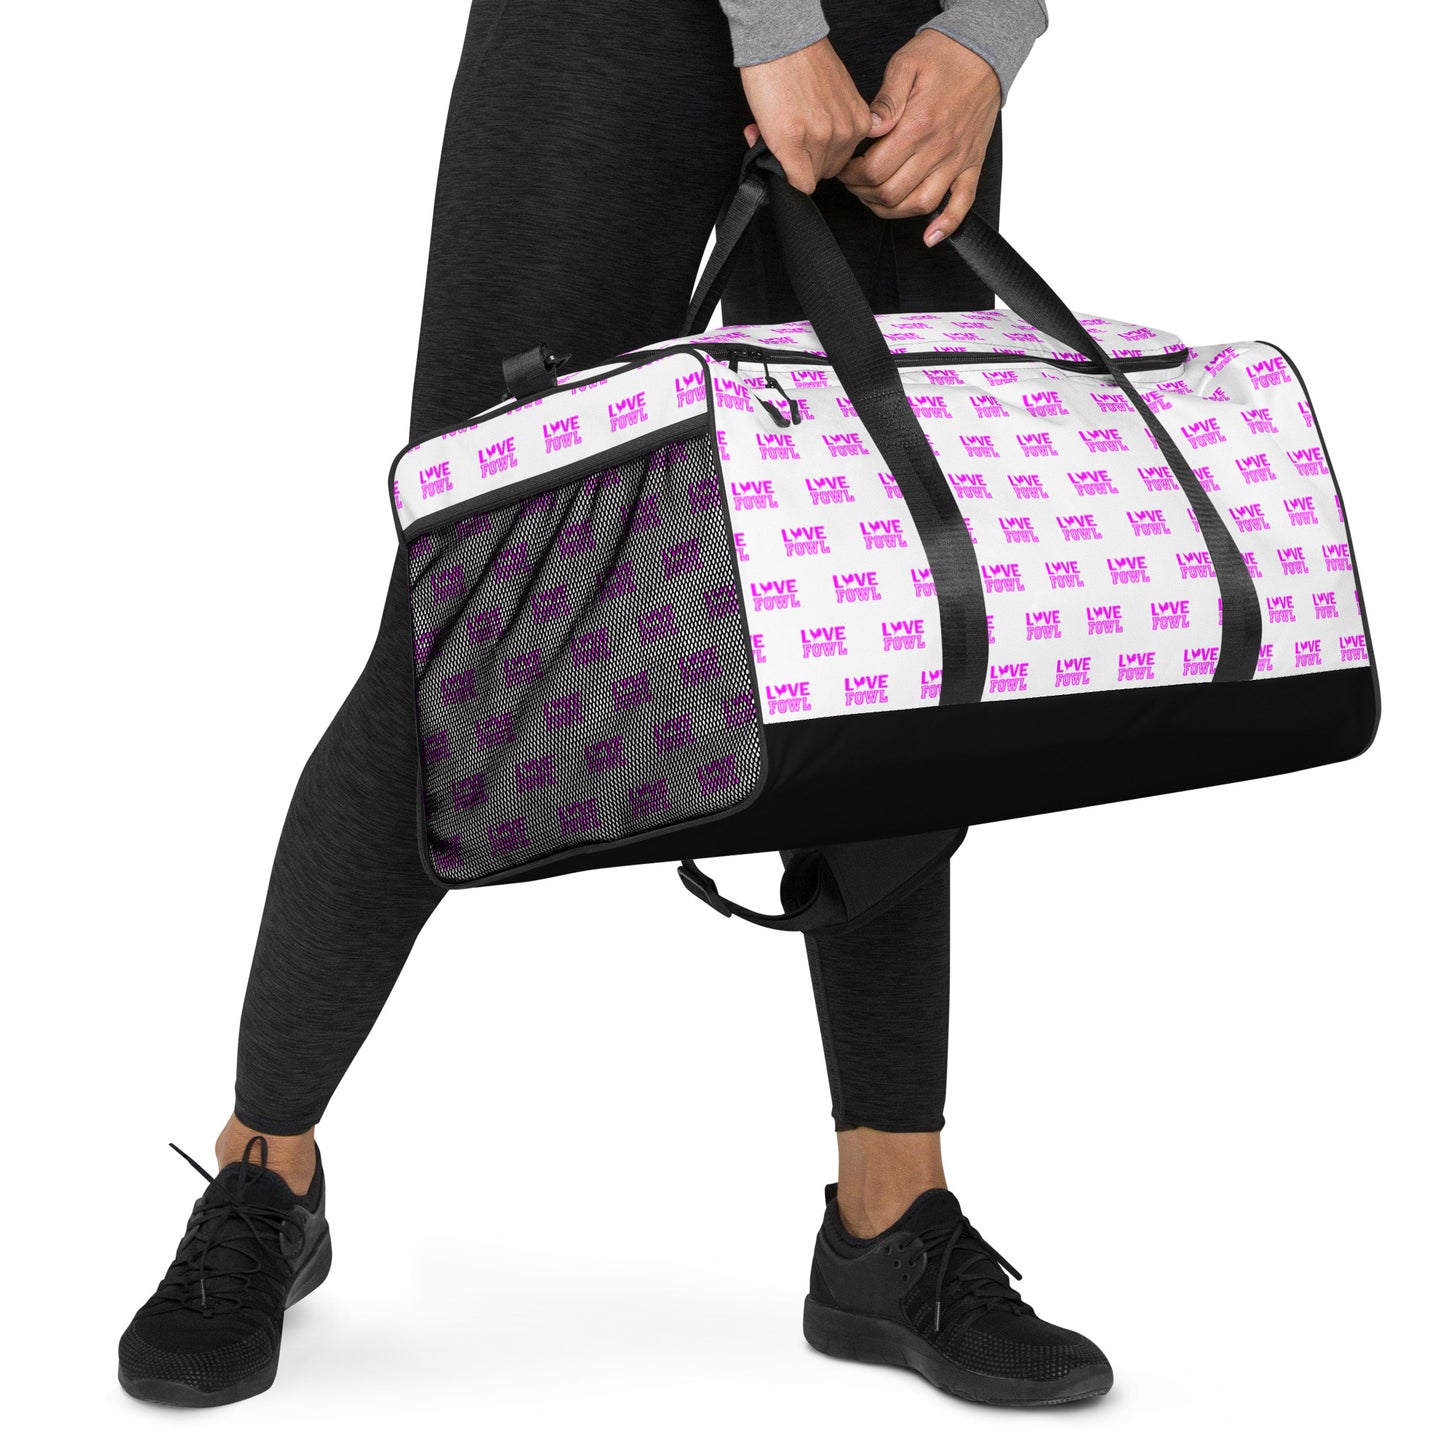 VS LOVE FOWL PINK Pattern Gamefowl Rooster White Duffle Bag